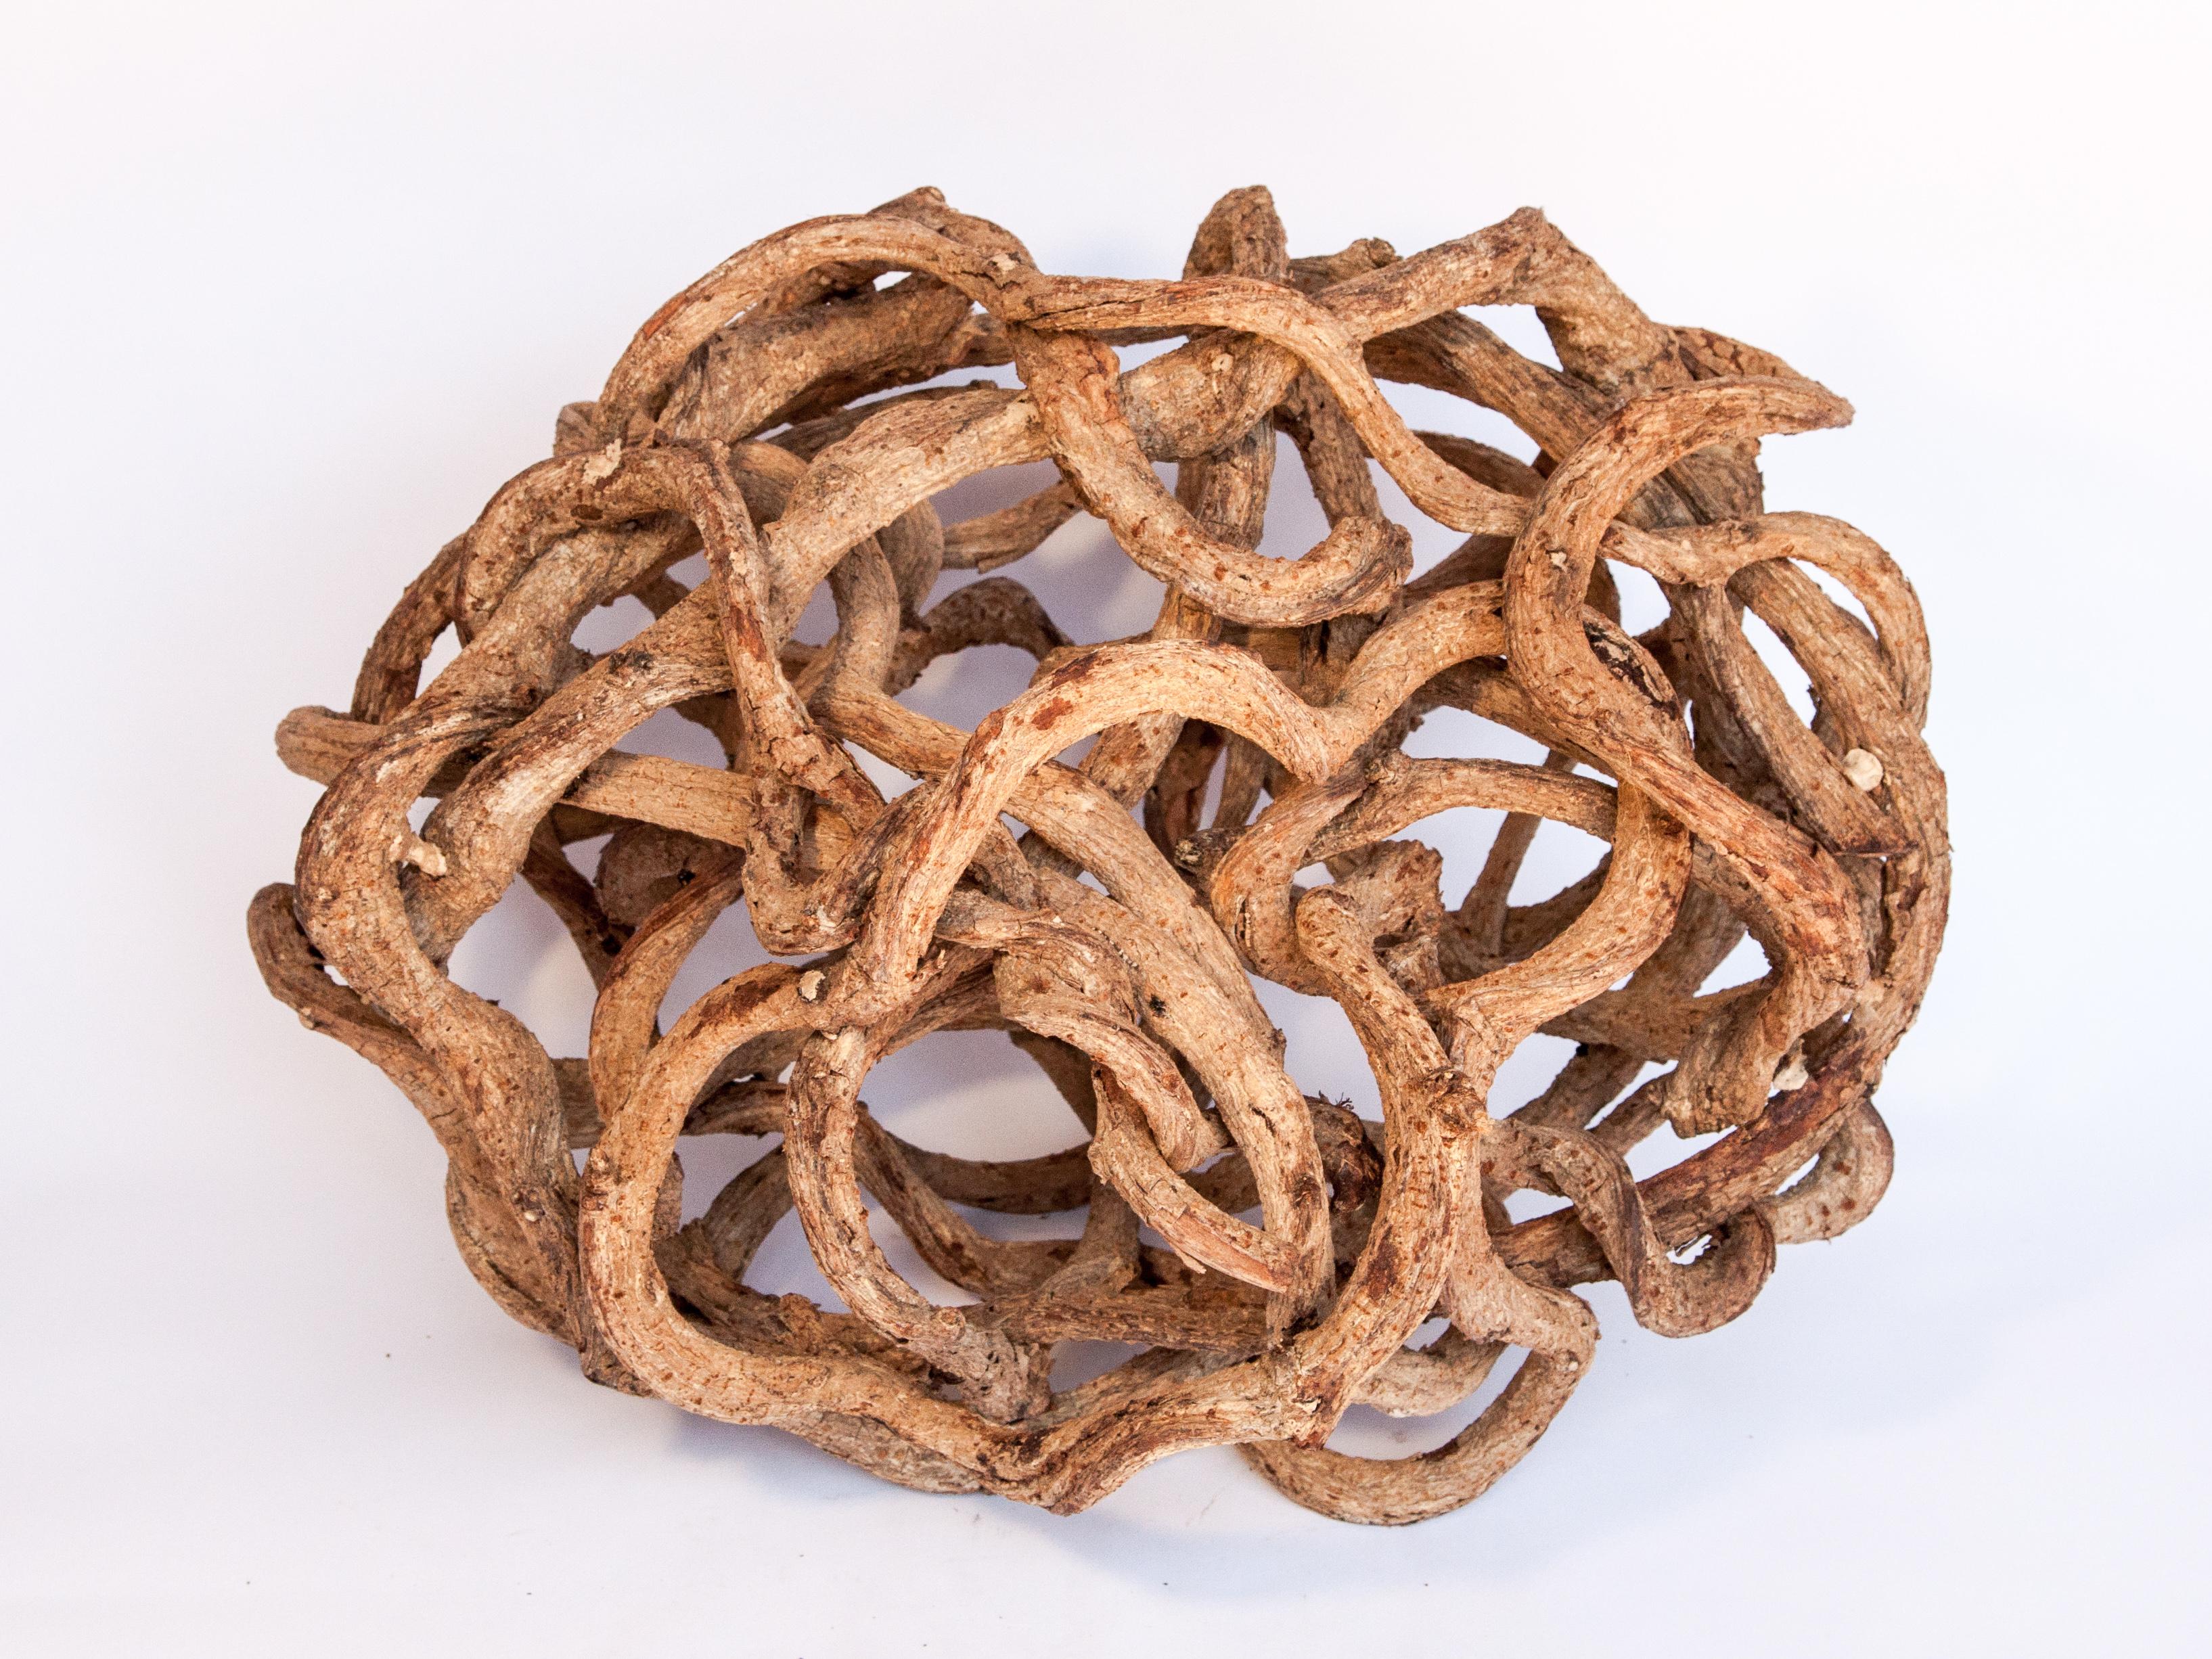 Liana vine organic sculpture in ovoid shape, from Thailand, 17 x 18 x 22.
The liana vines for this piece were gathered from the forests of eastern Thailand. They were cleaned and bleached and wound together into an ovoid shape.
This piece works